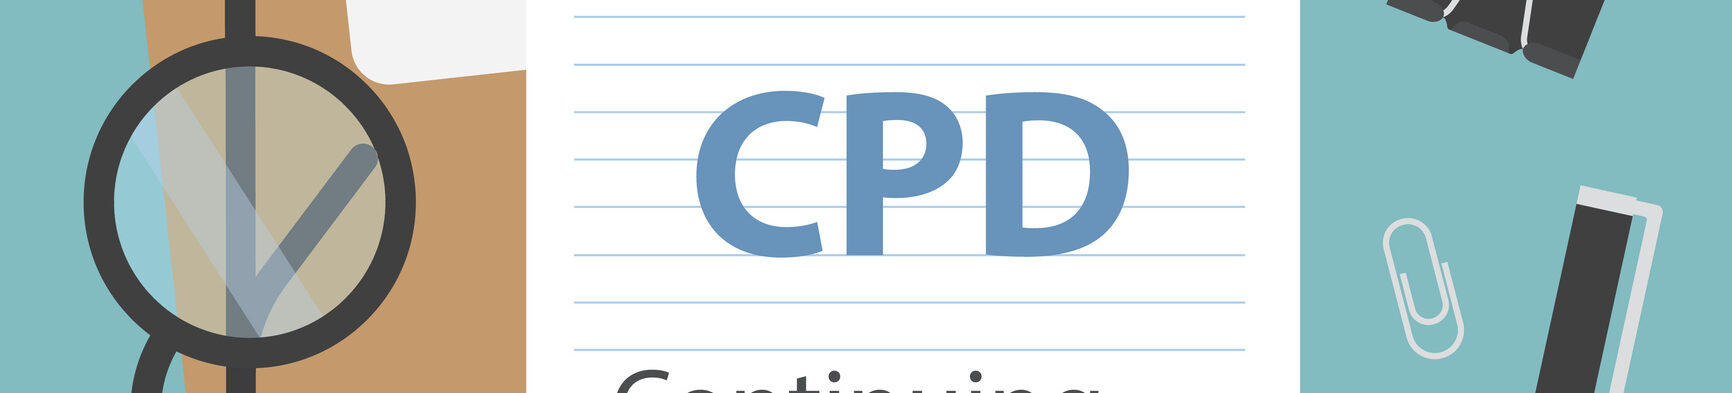 The Benefits of CPD (Continuing Professional Development) in Healthcare